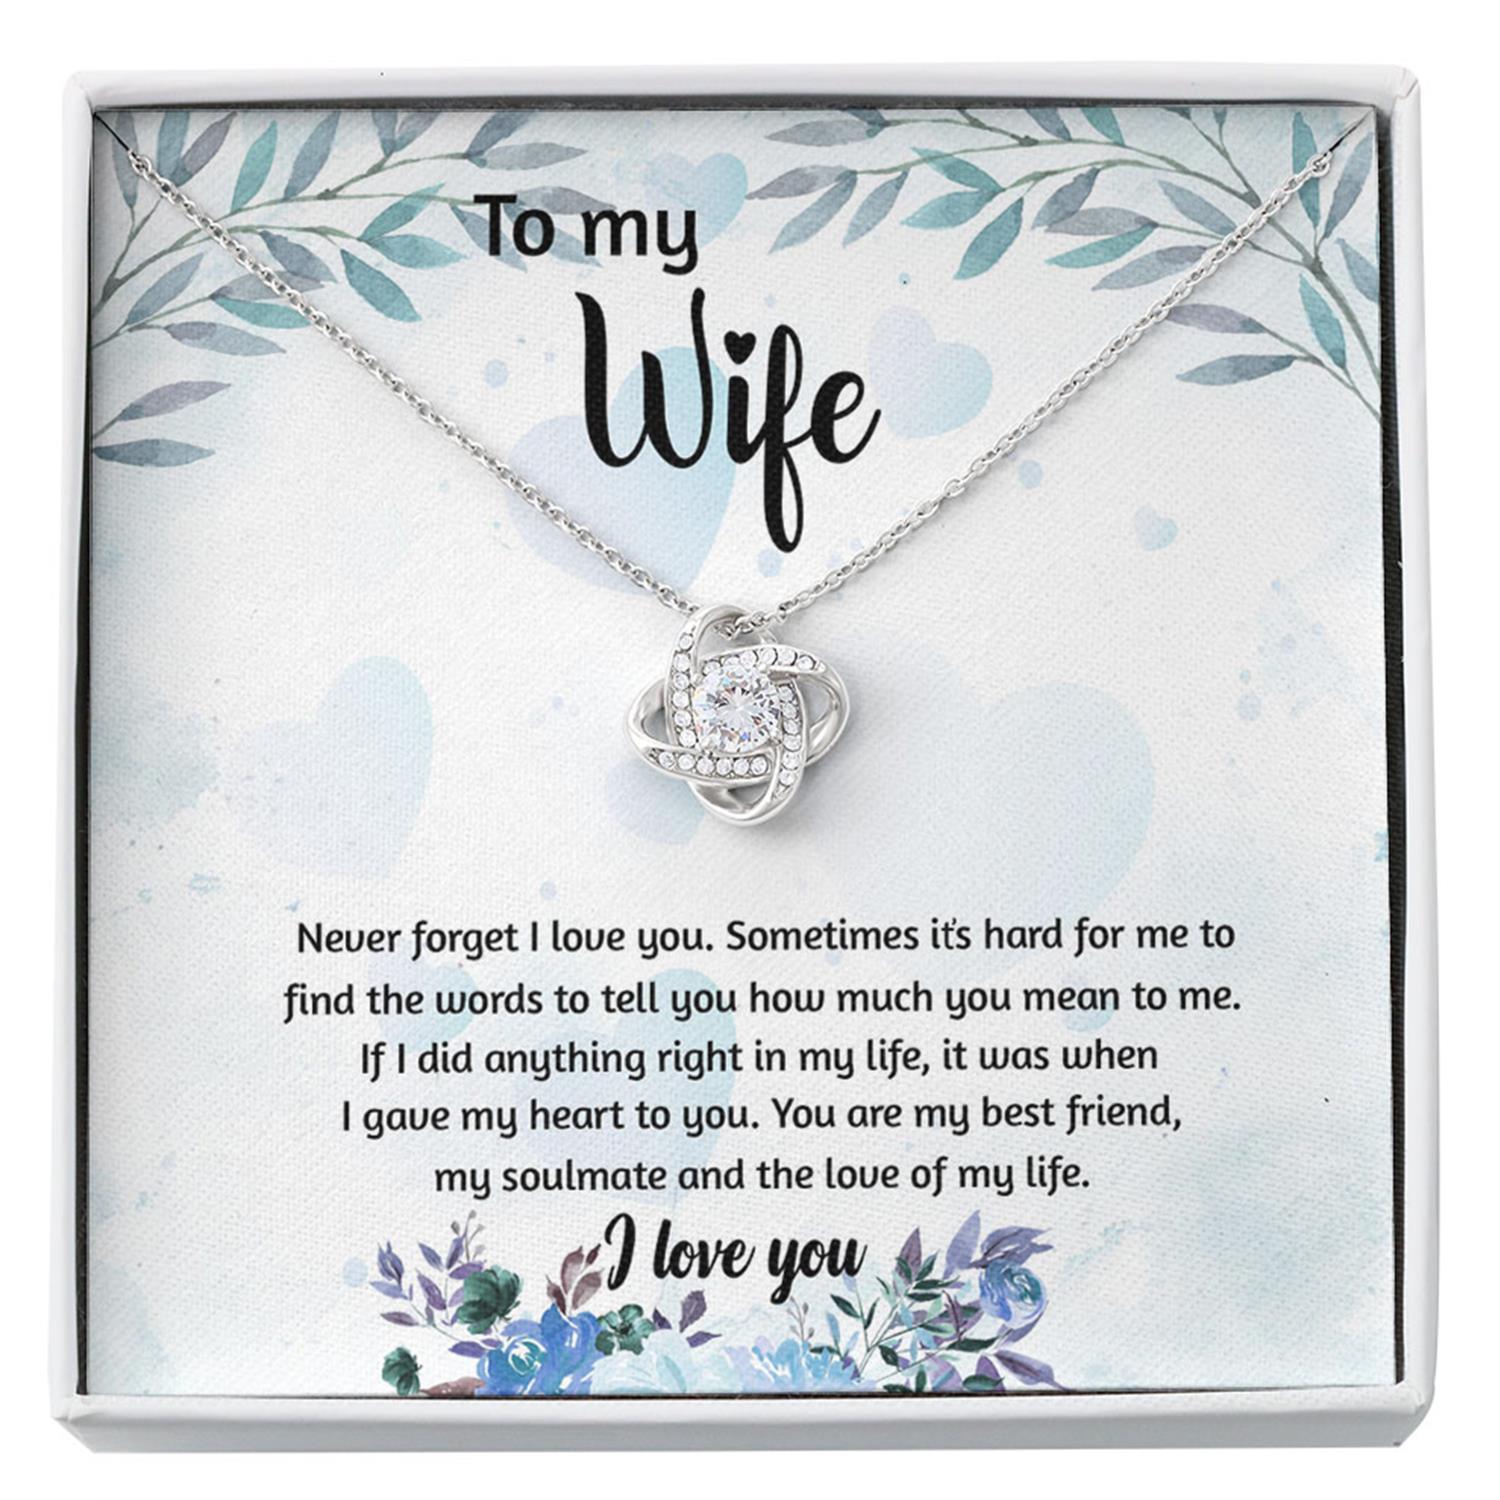 Wife Necklace, To My Wife Necklace Gift - You Are My Best Friend My Soulmate And The Love Of My Life Custom Necklace